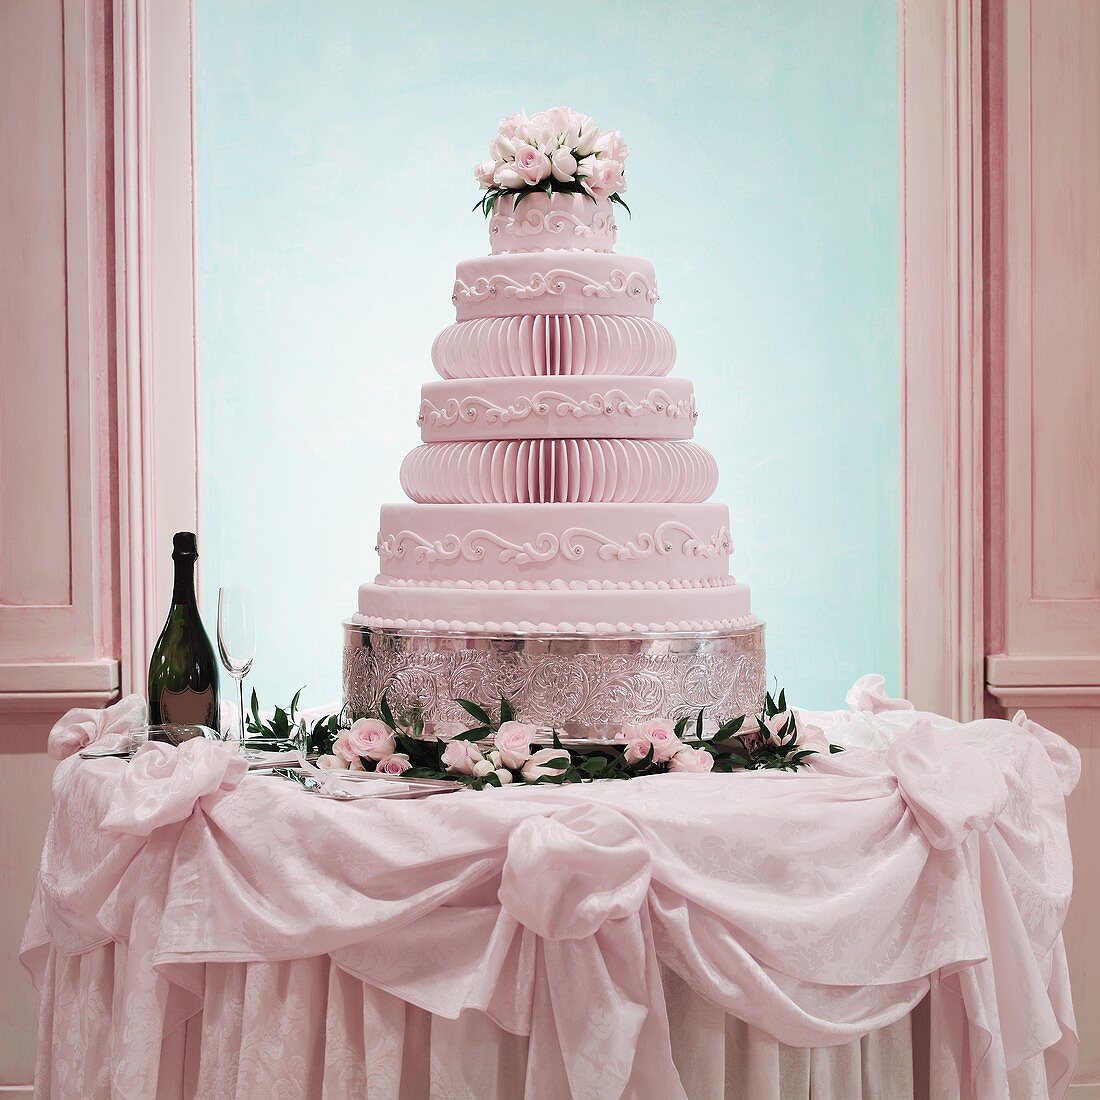 A Multi-tiered Wedding Cake on a Table with Champagne